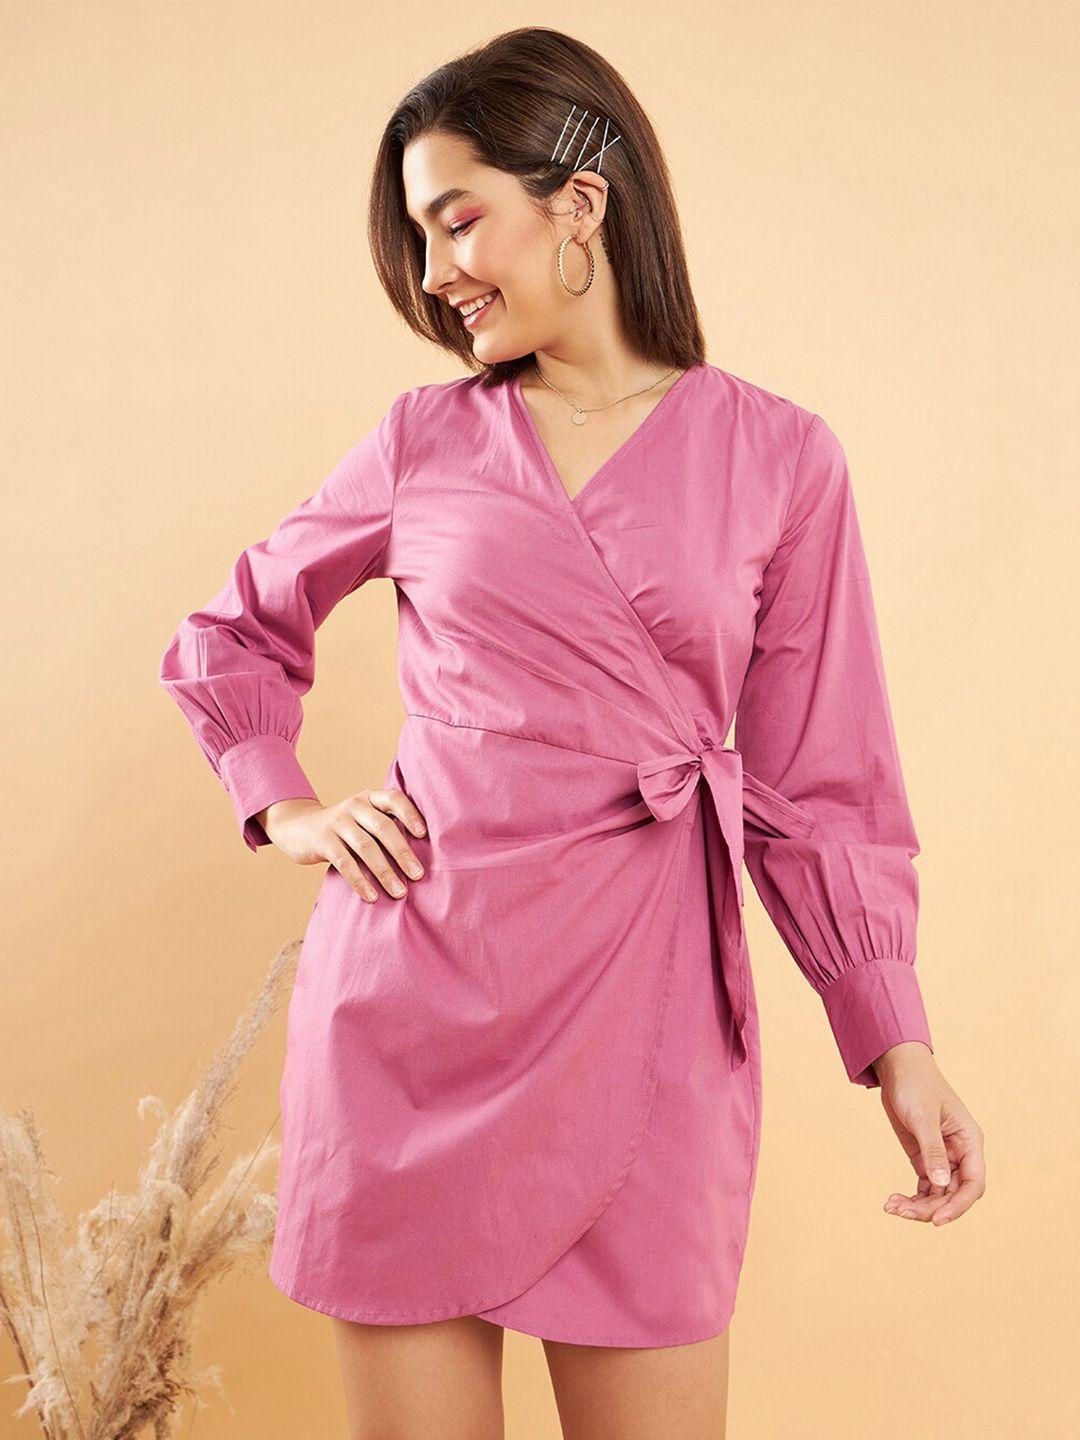 kassually-pink-v-neck-cuffed-sleeves-tie-ups-pure-cotton-wrap-dress